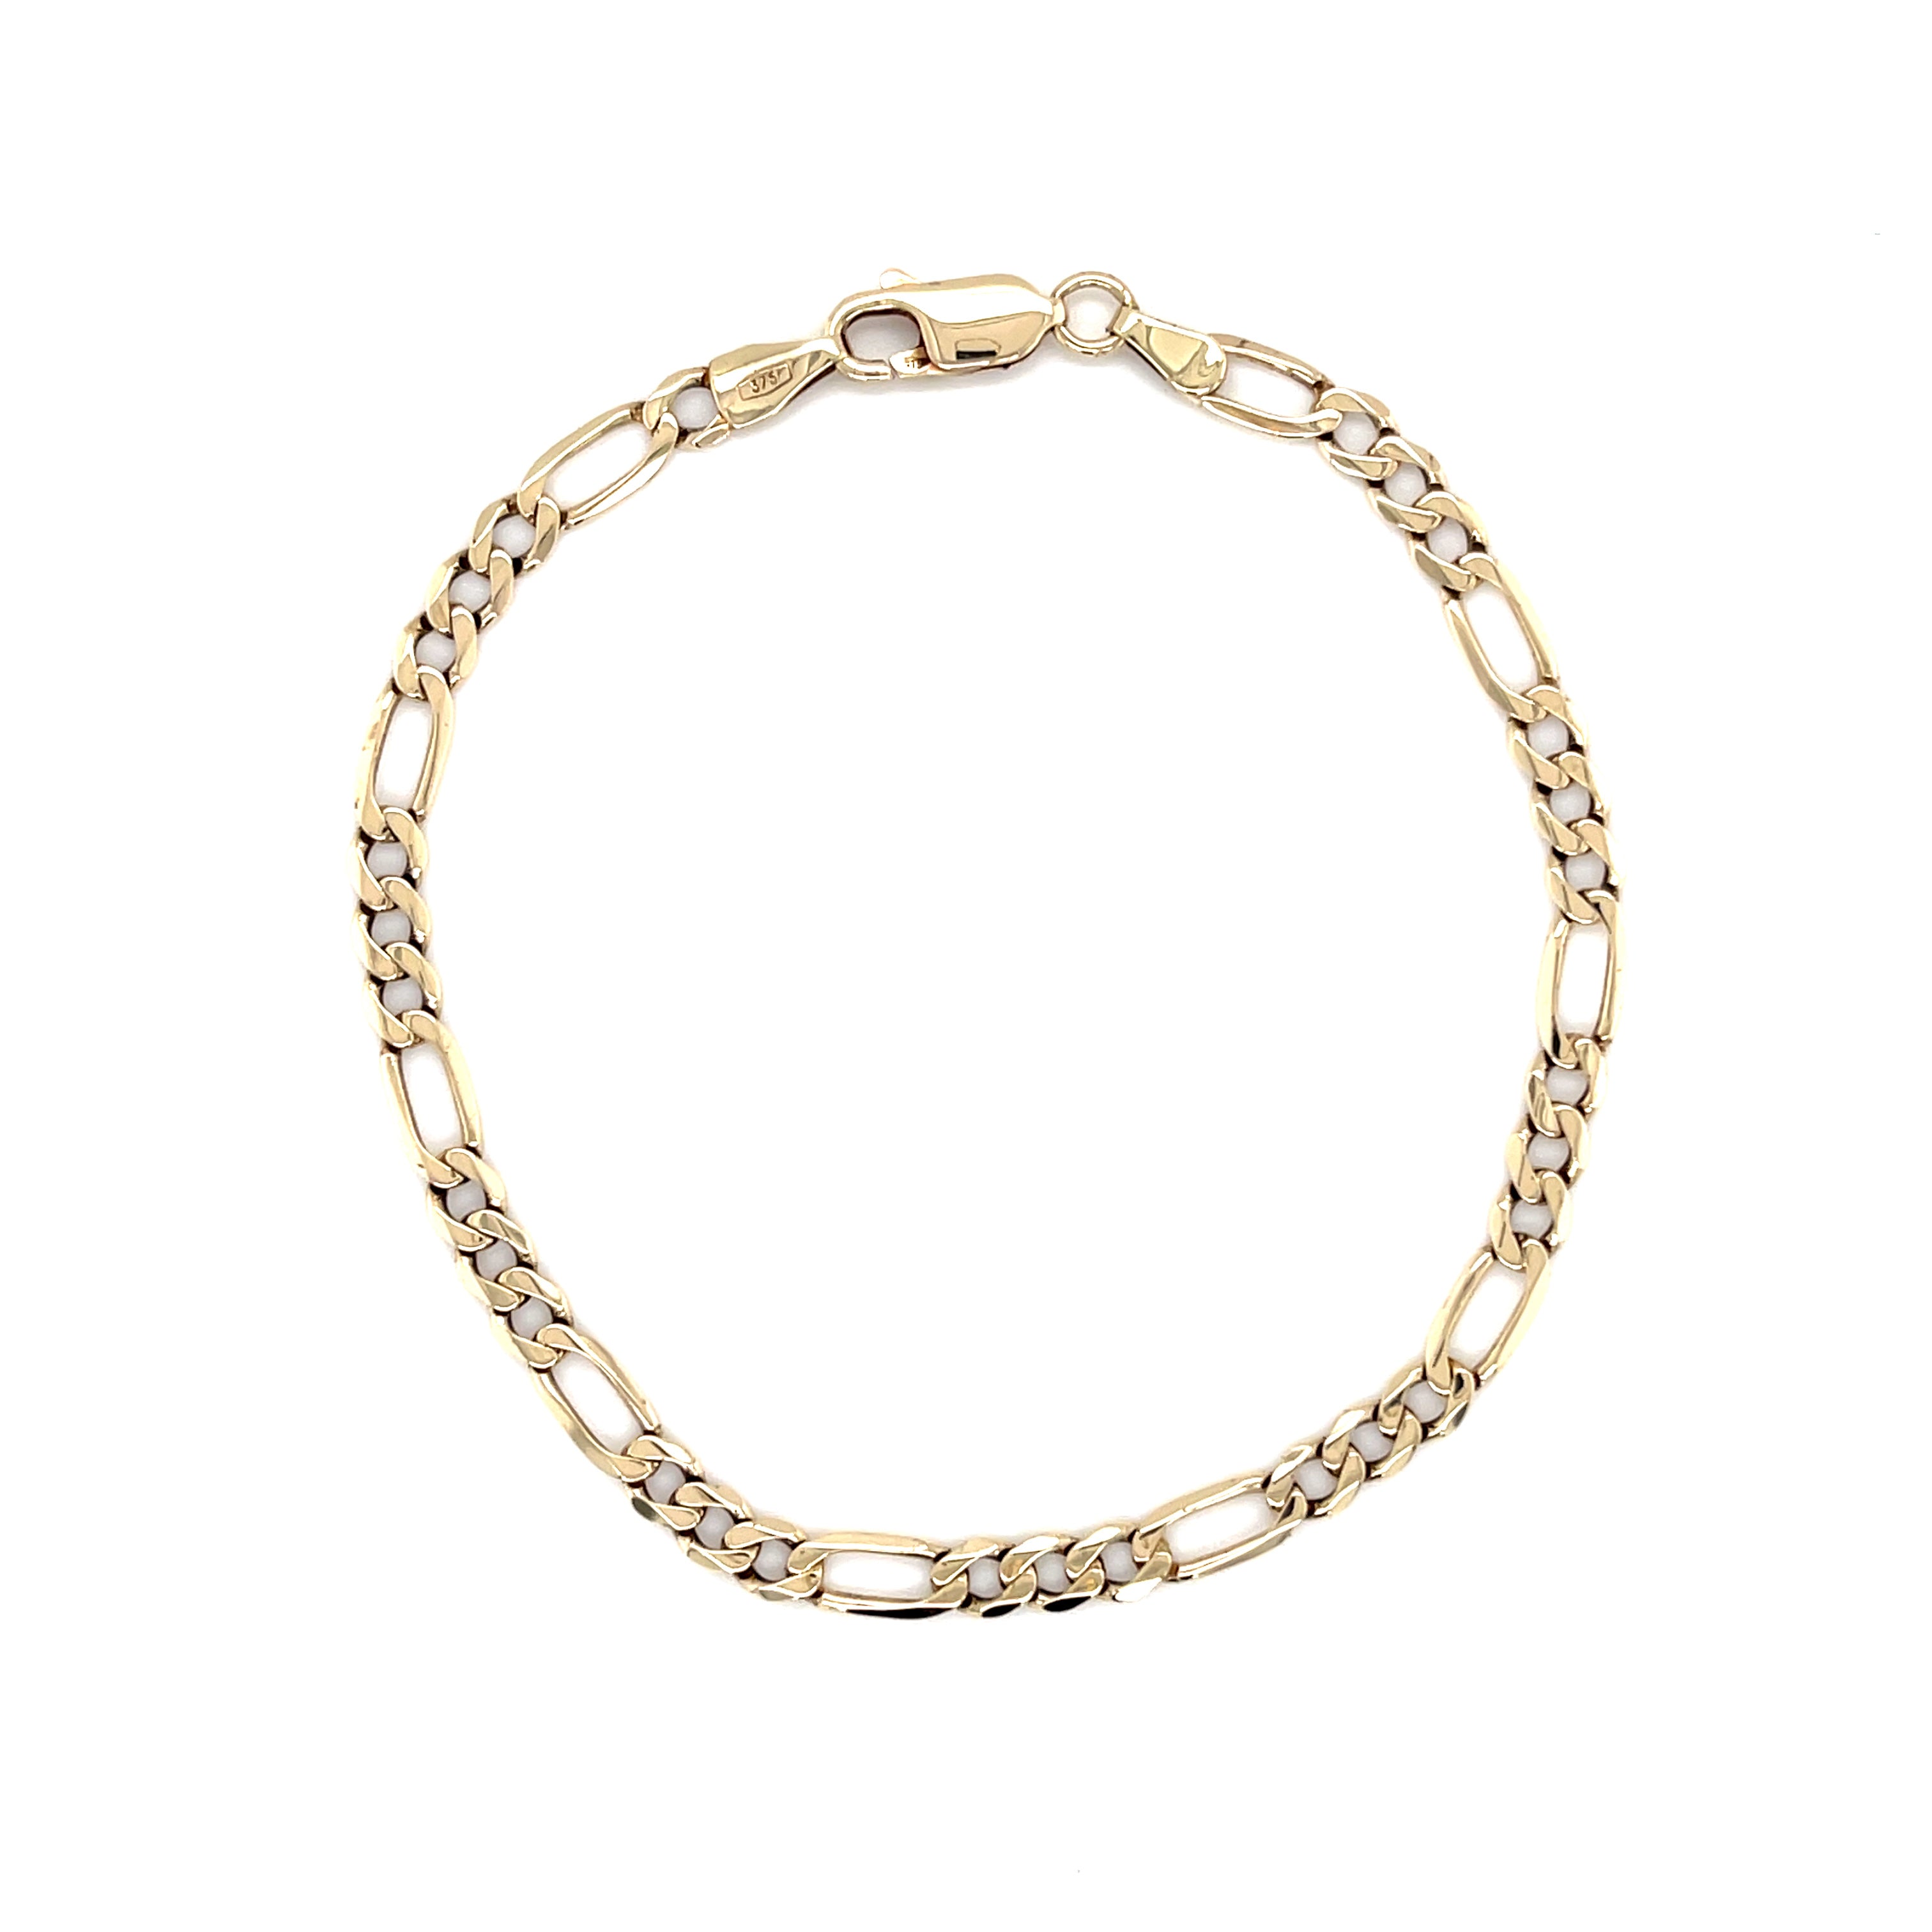 9ct Yellow Gold 7.5" Figaro Link Bracelet - 3.60g SOLD